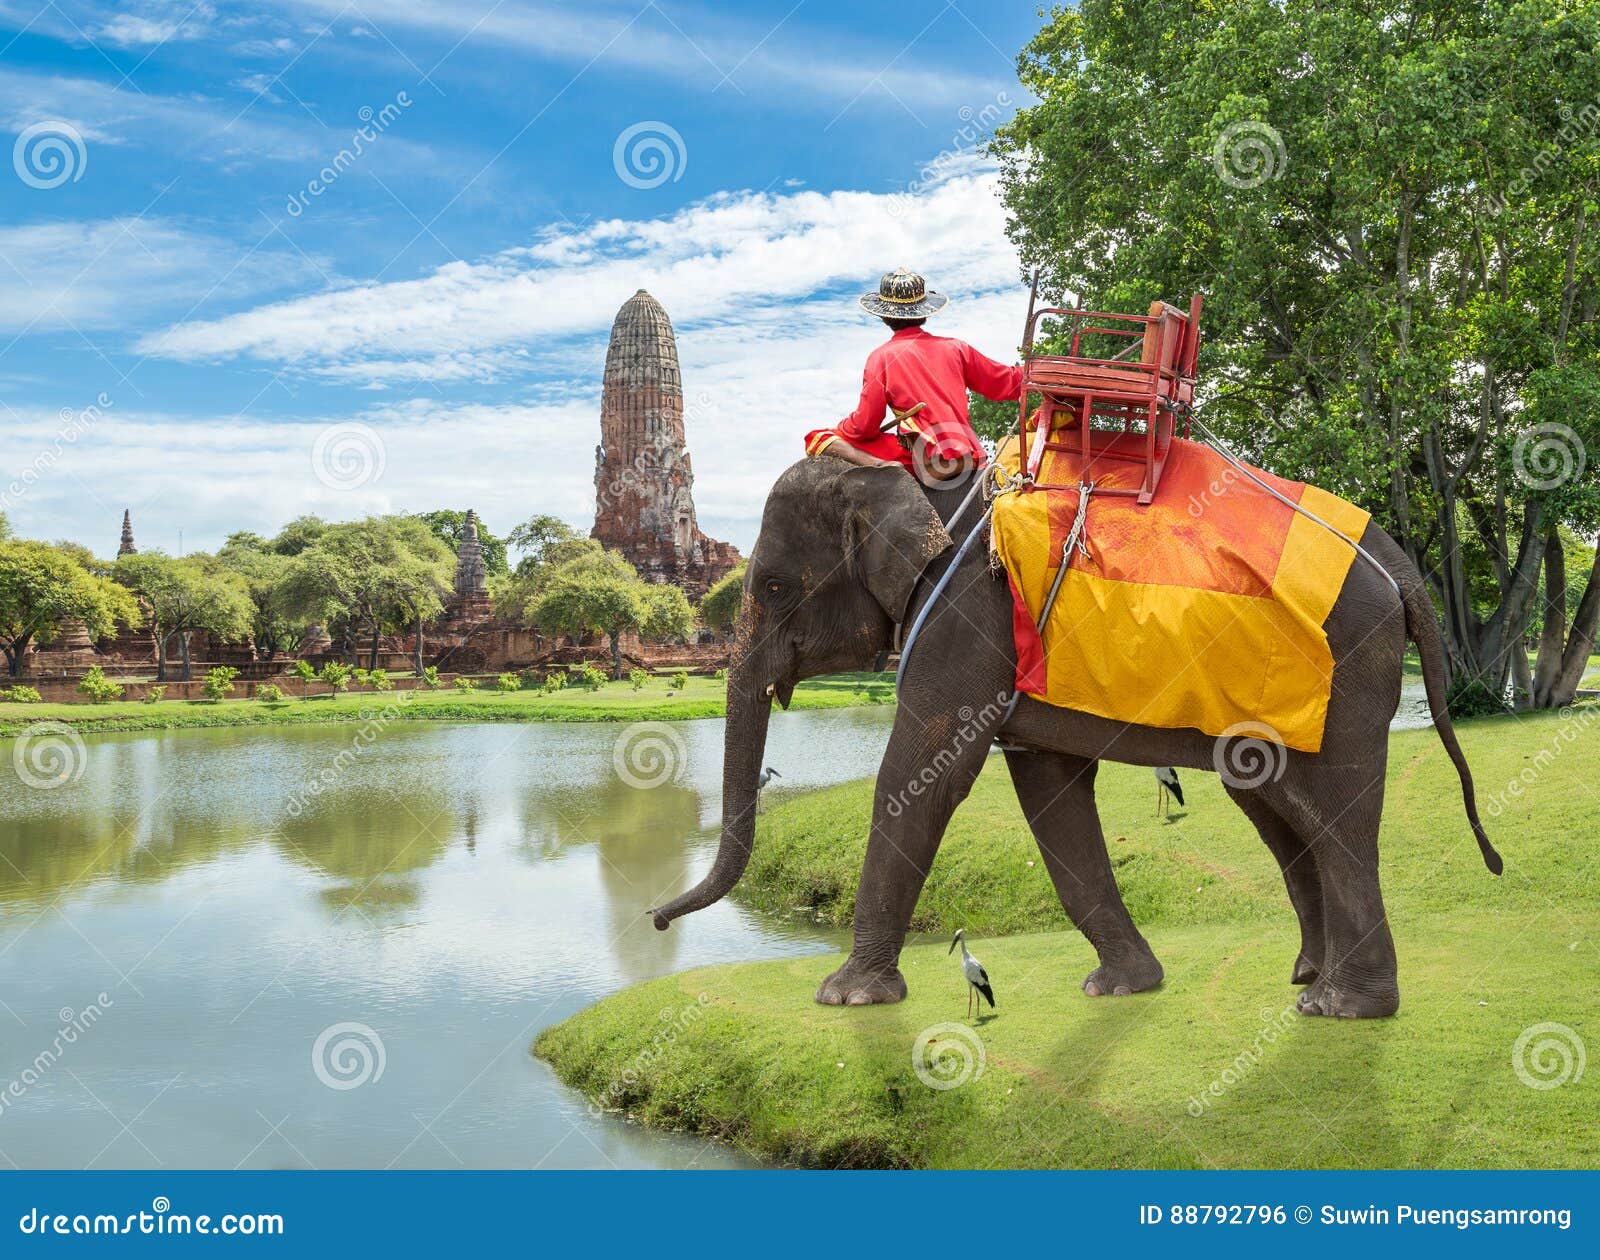 elephant for tourists ride tour on an of the ancient city old te